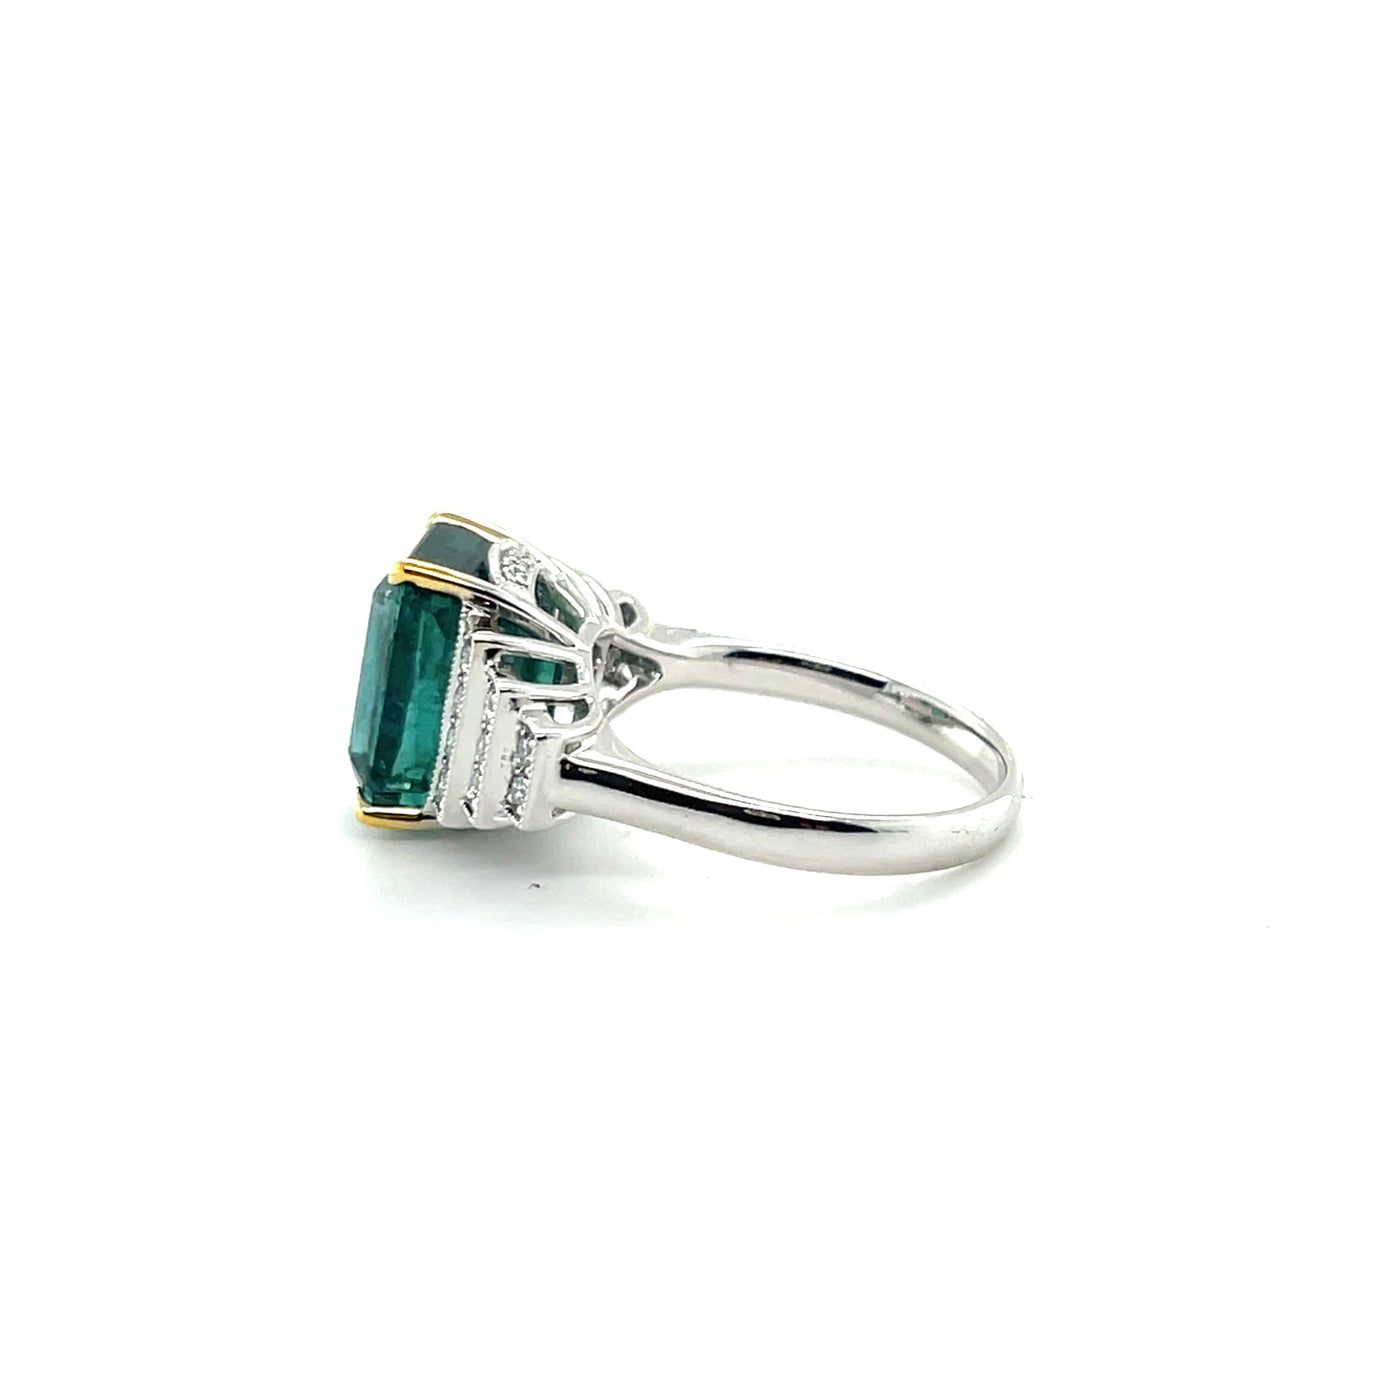 18ct white gold Art Deco style emerald and diamond ring